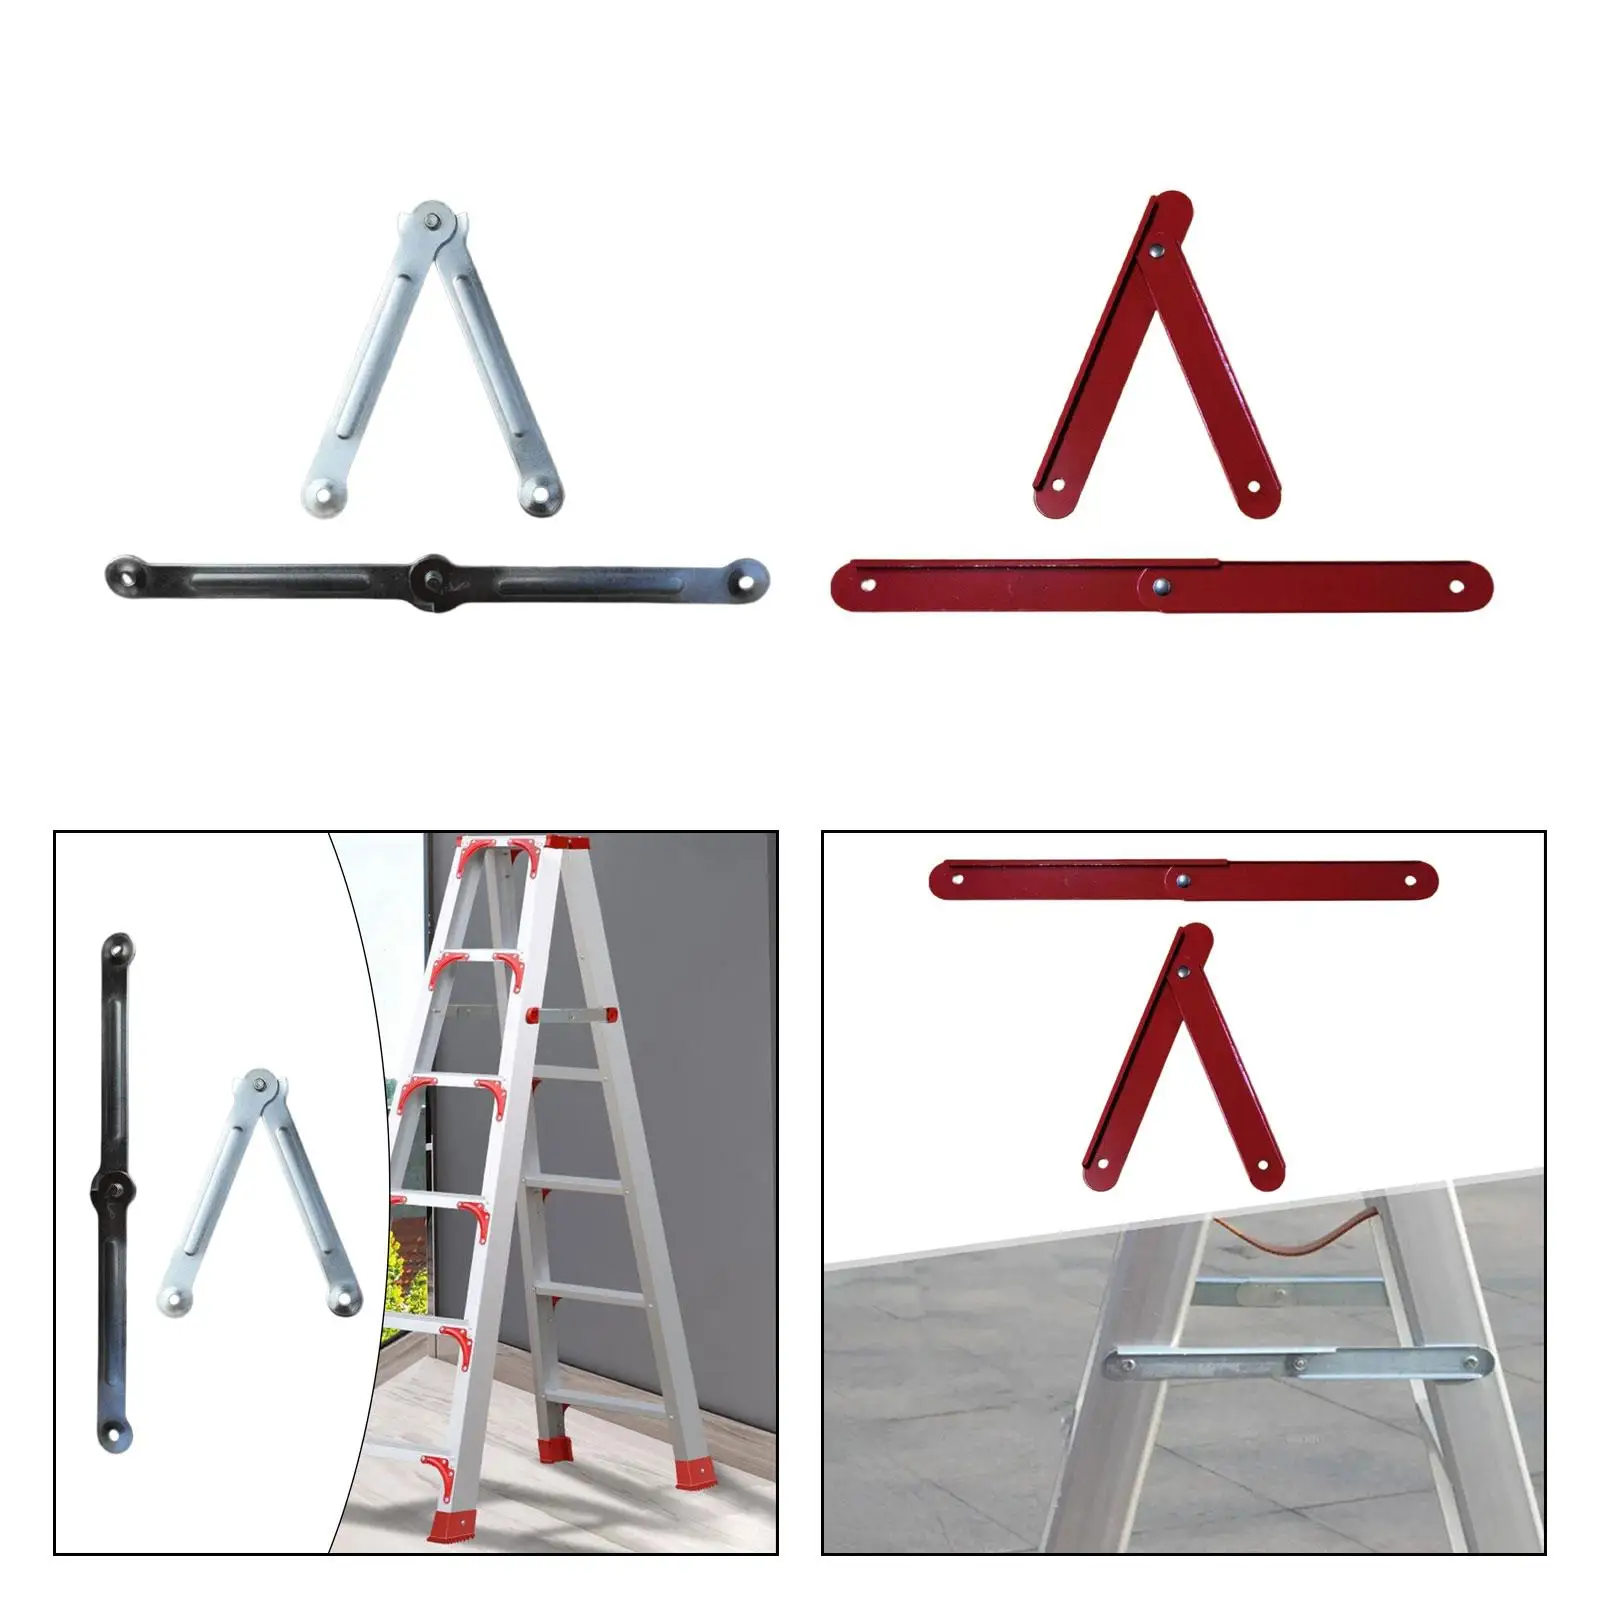 2 Pieces Folding Step Ladder Hinge Replacement, Ladder Rod Metal Stepladders Reinforced Tie Rod,